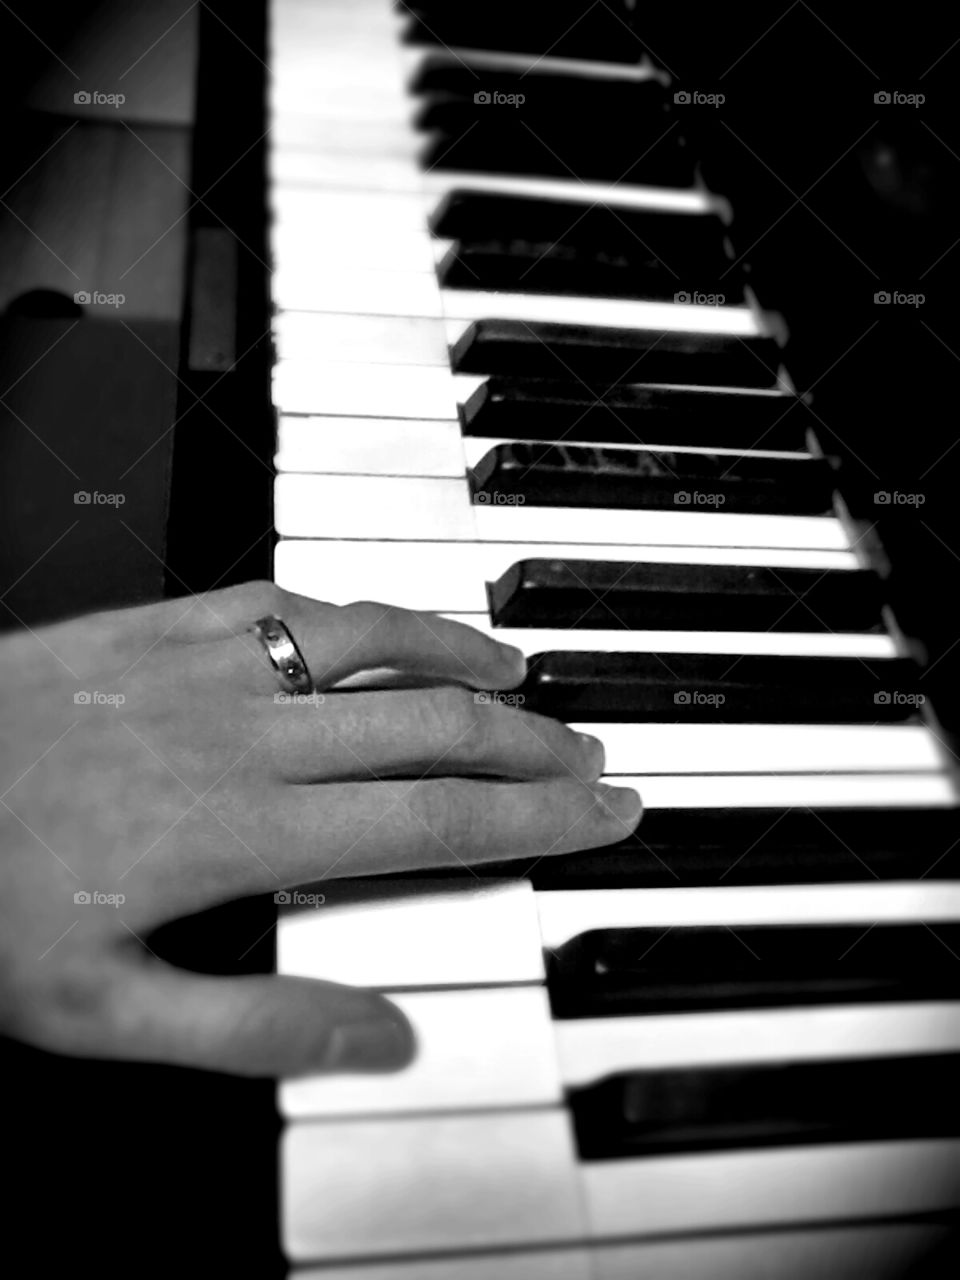 True love waits ring. playing keyboard with this ring